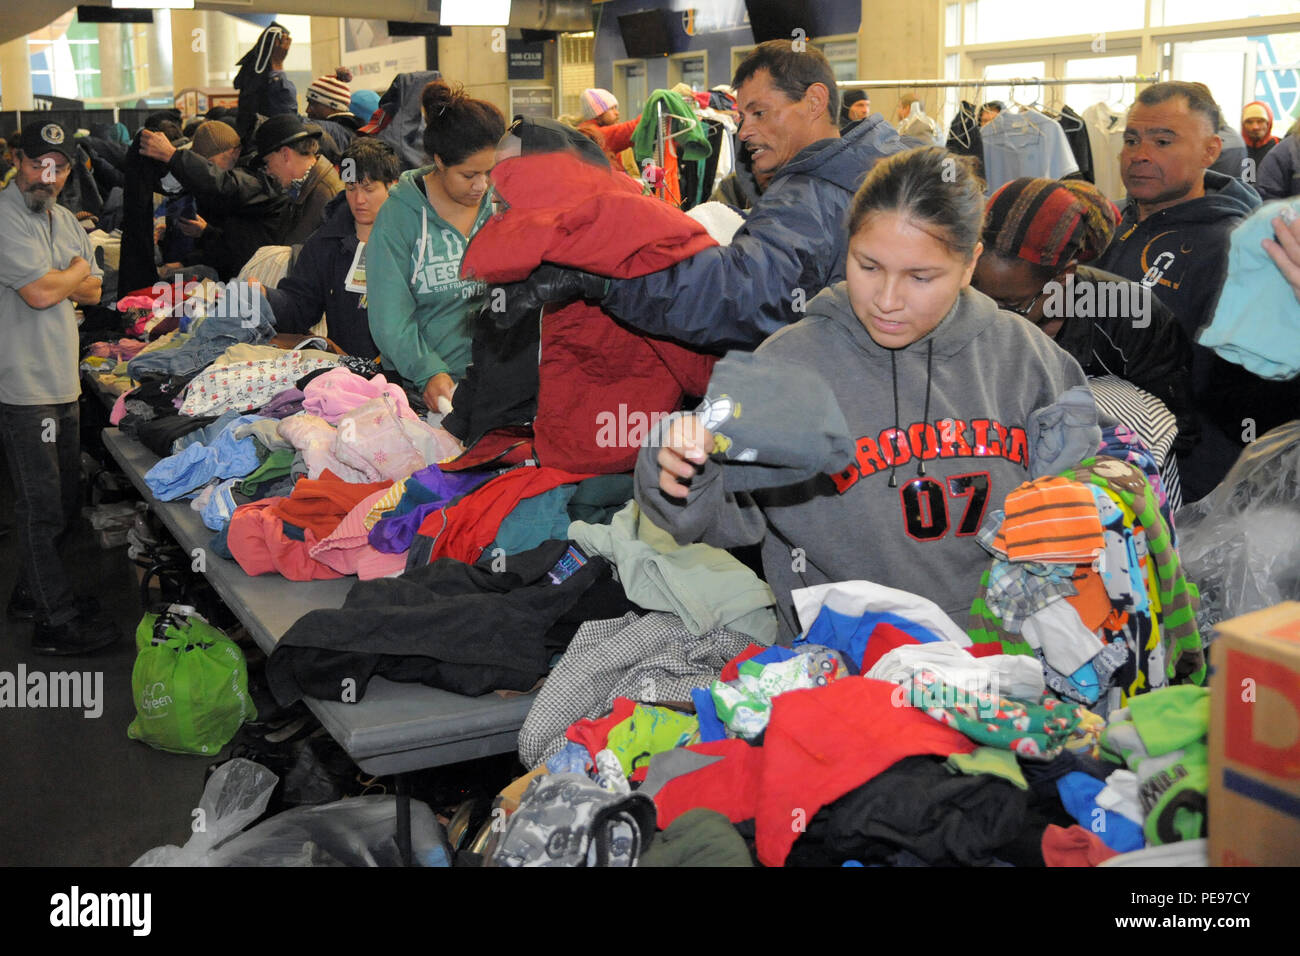 Utah residents receive donated winter clothing Nov. 16 at Vivint Smart Home Arena, Salt Lake City, Utah. The 17th annual community outreach event called 'We Care-We Share' helped thousands in the greater Salt Lake City community. (U.S. Air Force photo by Todd Cromar) Stock Photo